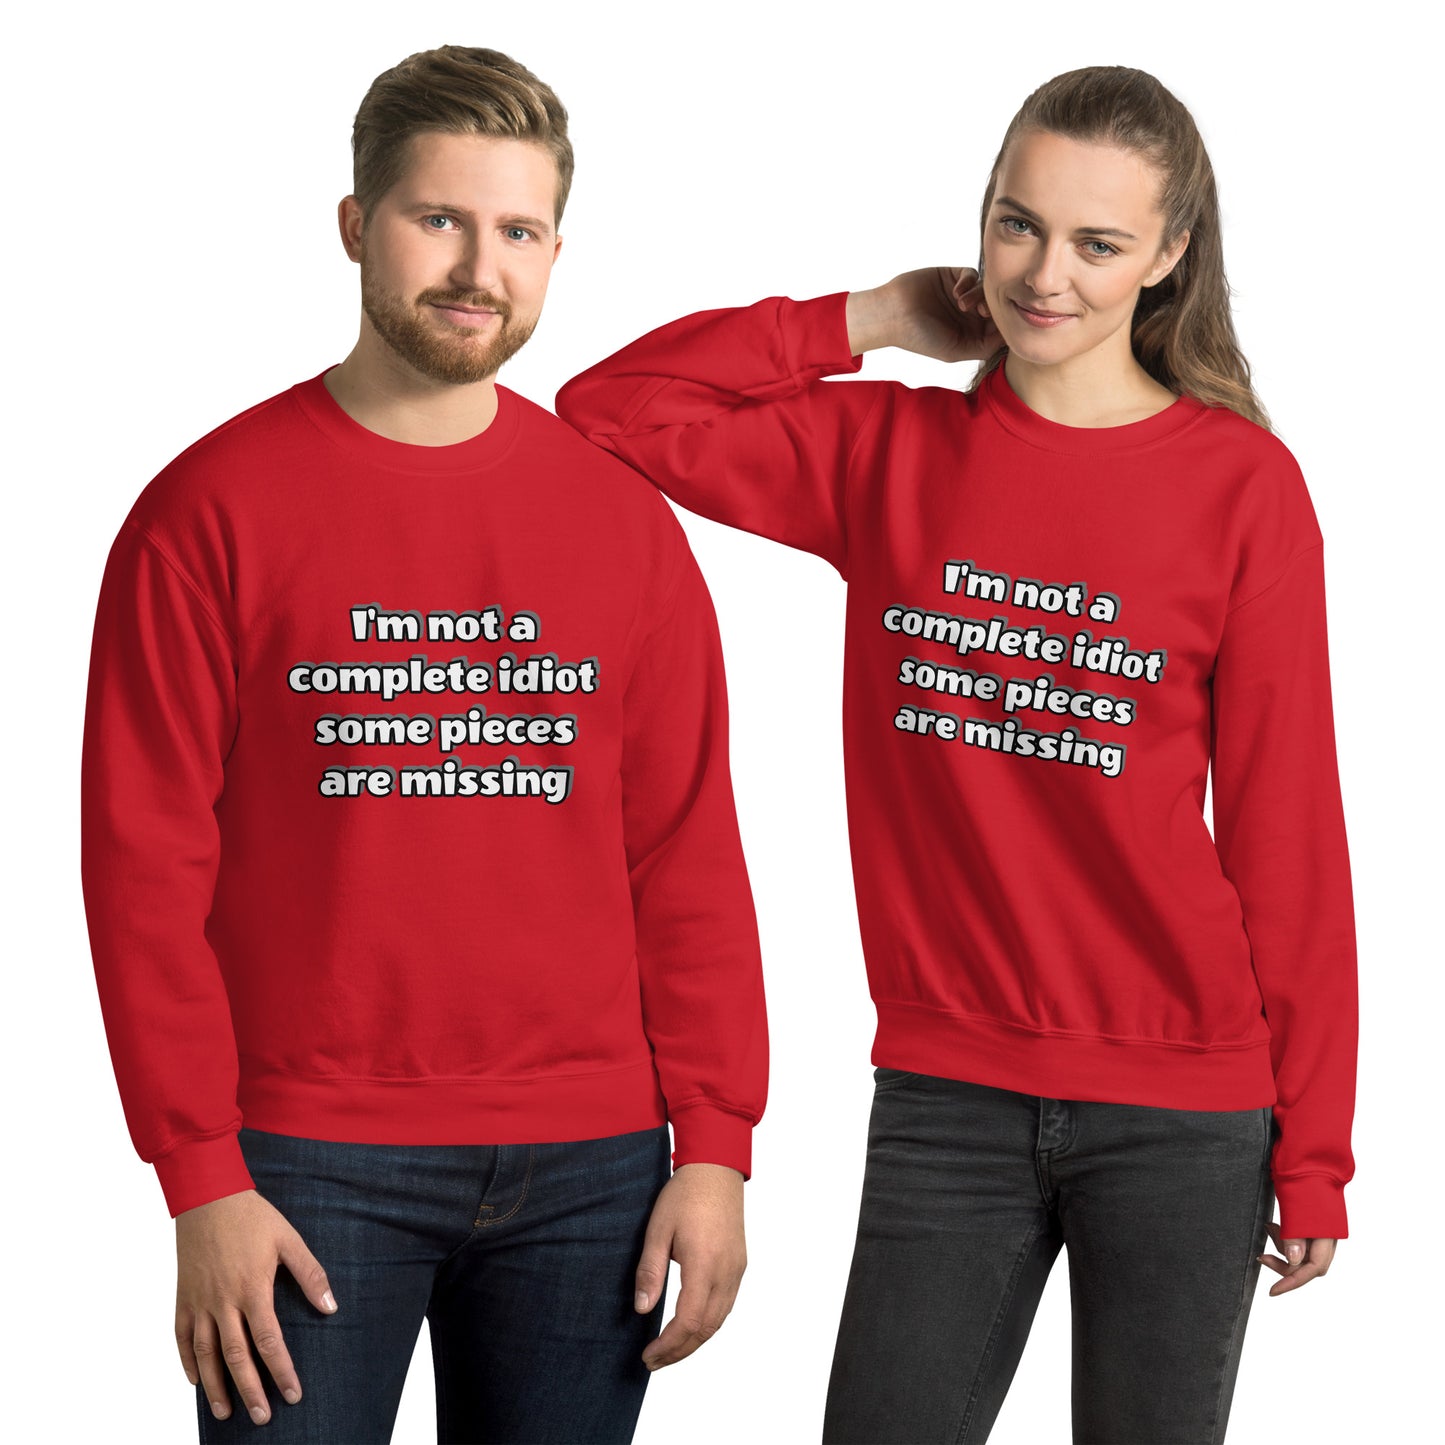 Man and women with red sweatshirt with text “I’m not a complete idiot, some pieces are missing”